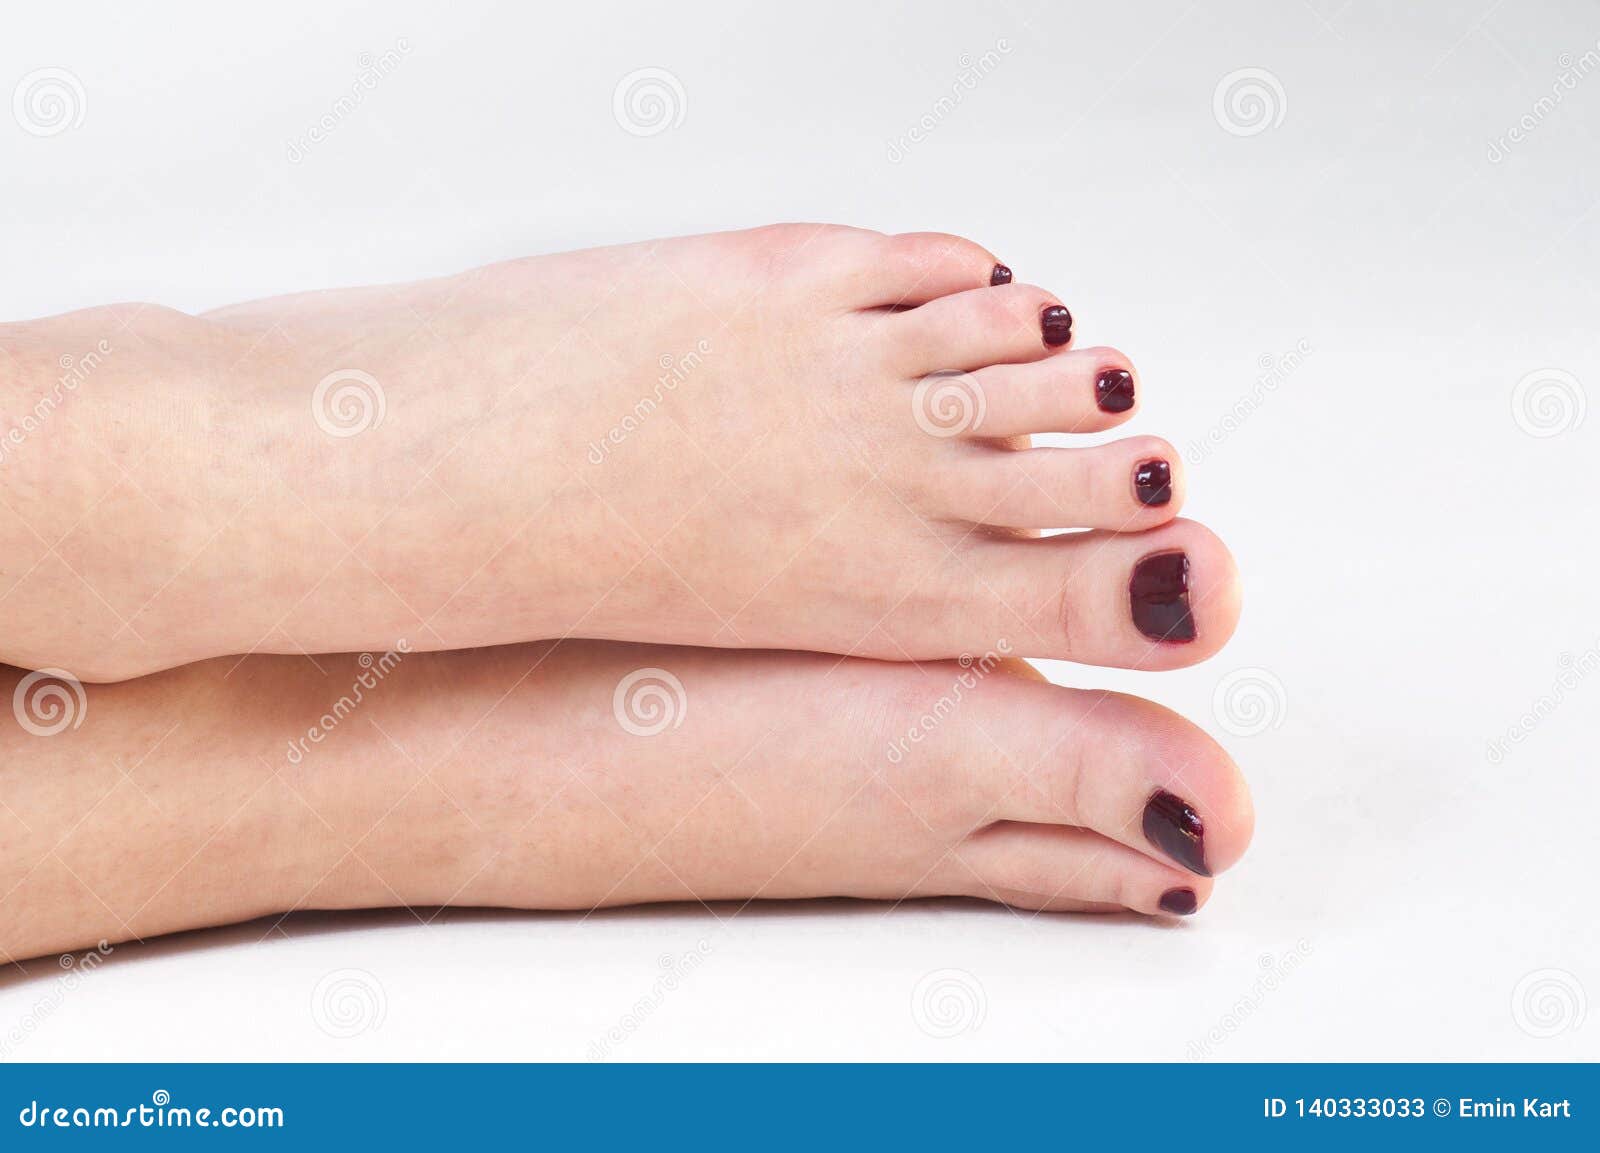 Prettiest toes contest